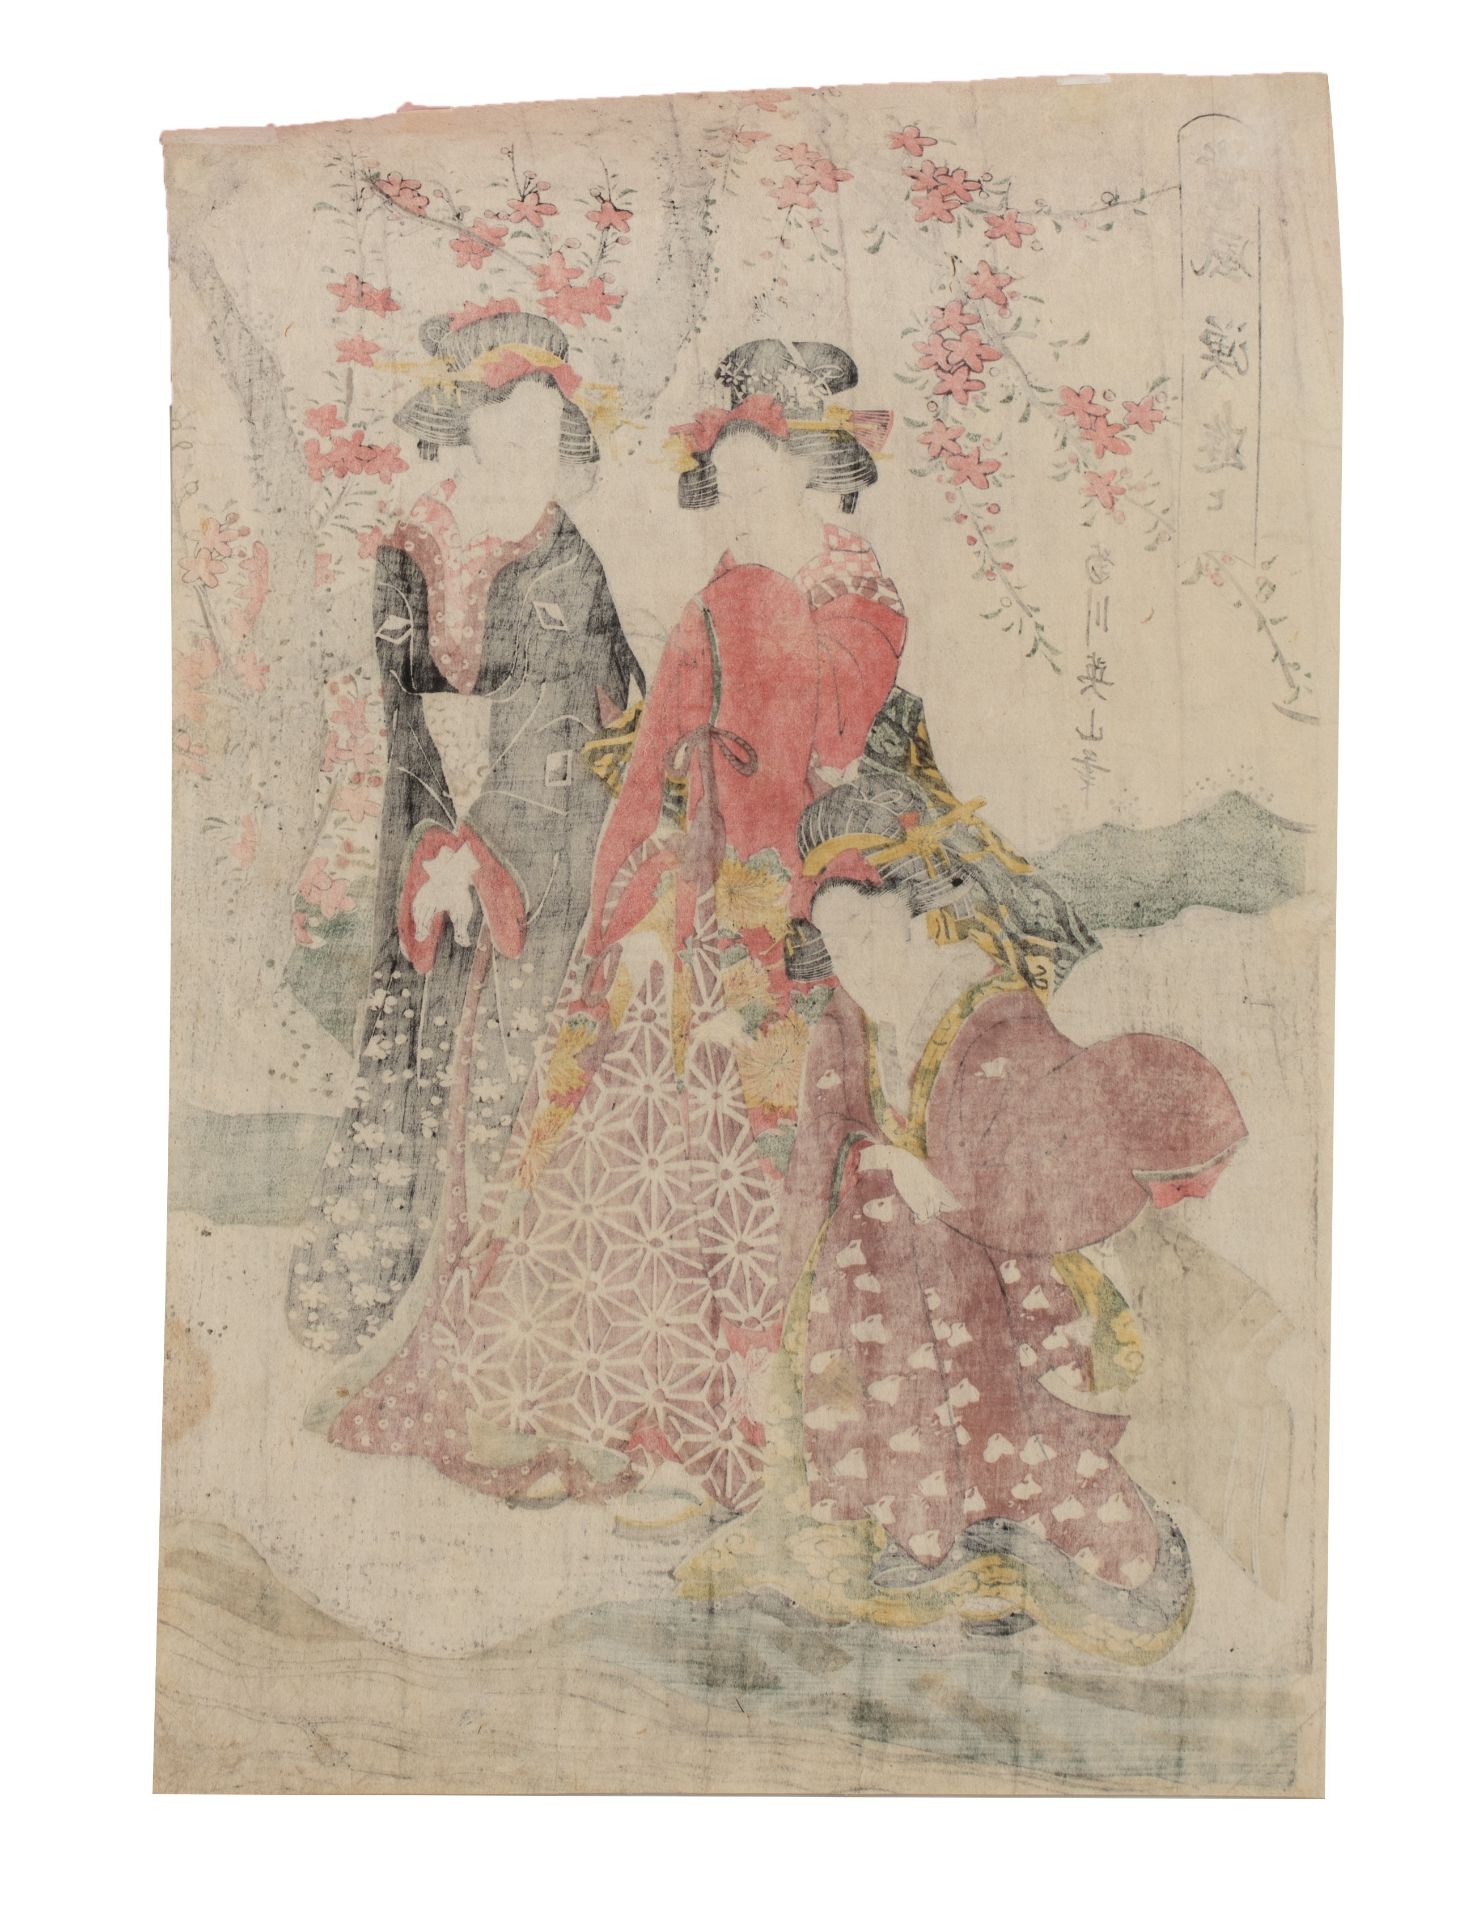 Two Japanese woodblock prints by Eizan, one with a portrait of a courtesan on a walk, misty autumn s - Image 6 of 8